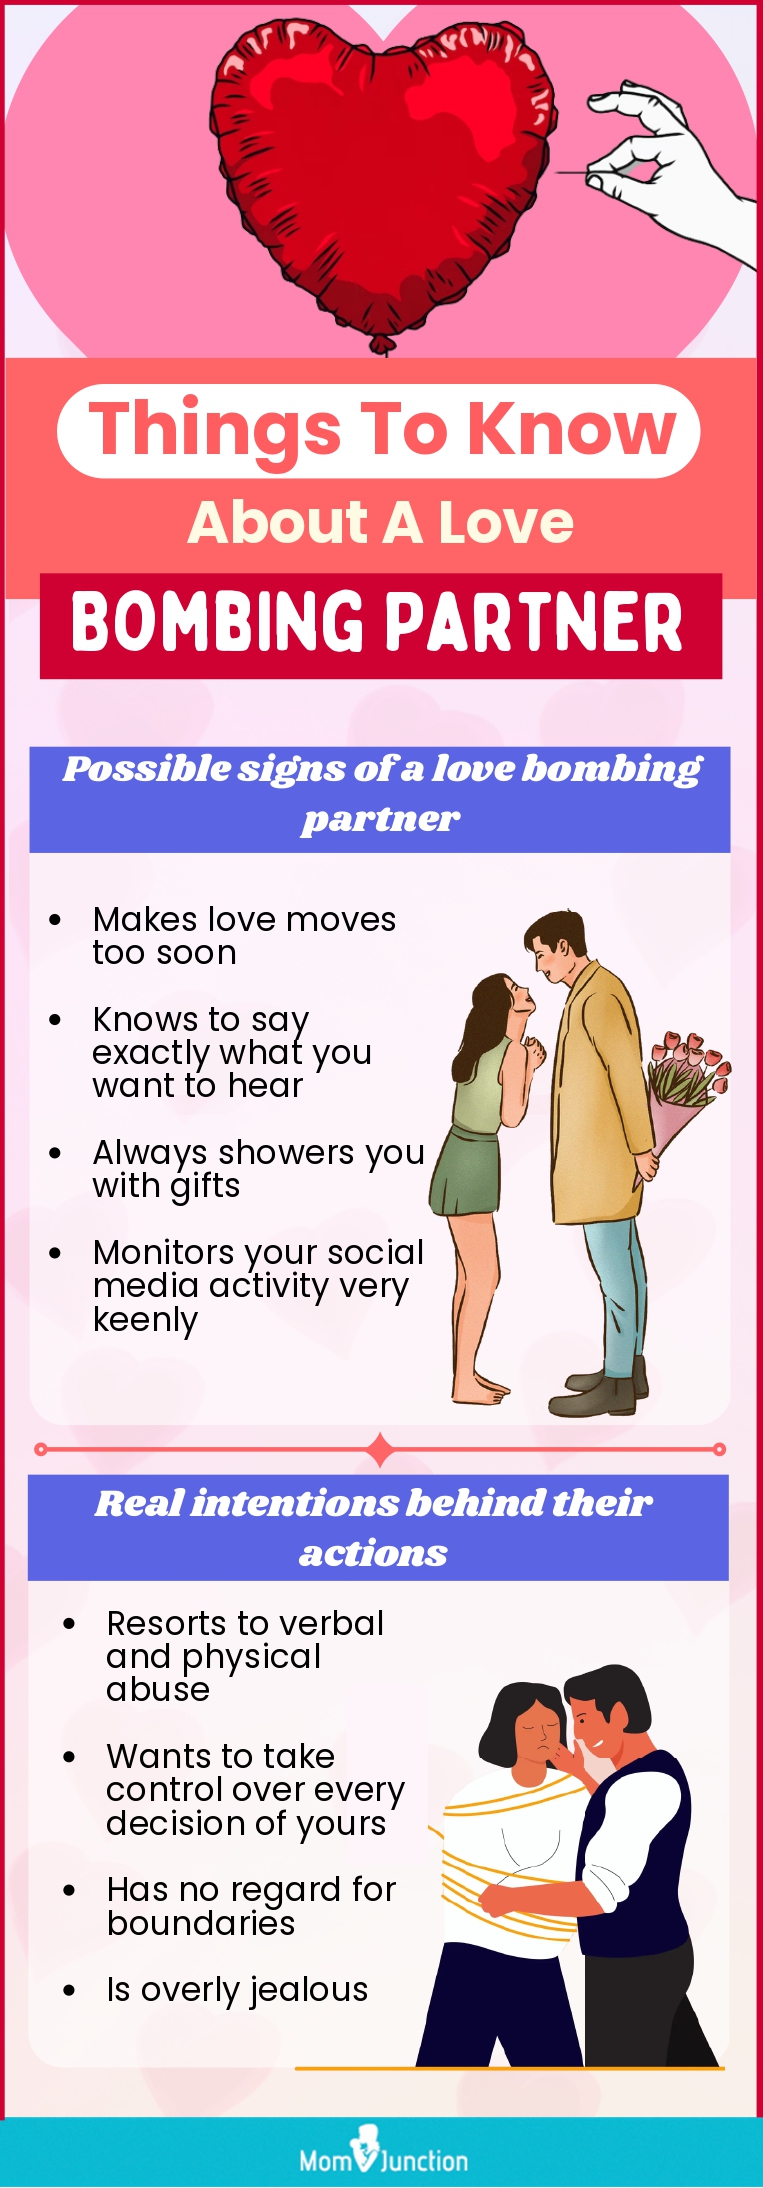 things to know about a love bombing partner (infographic)